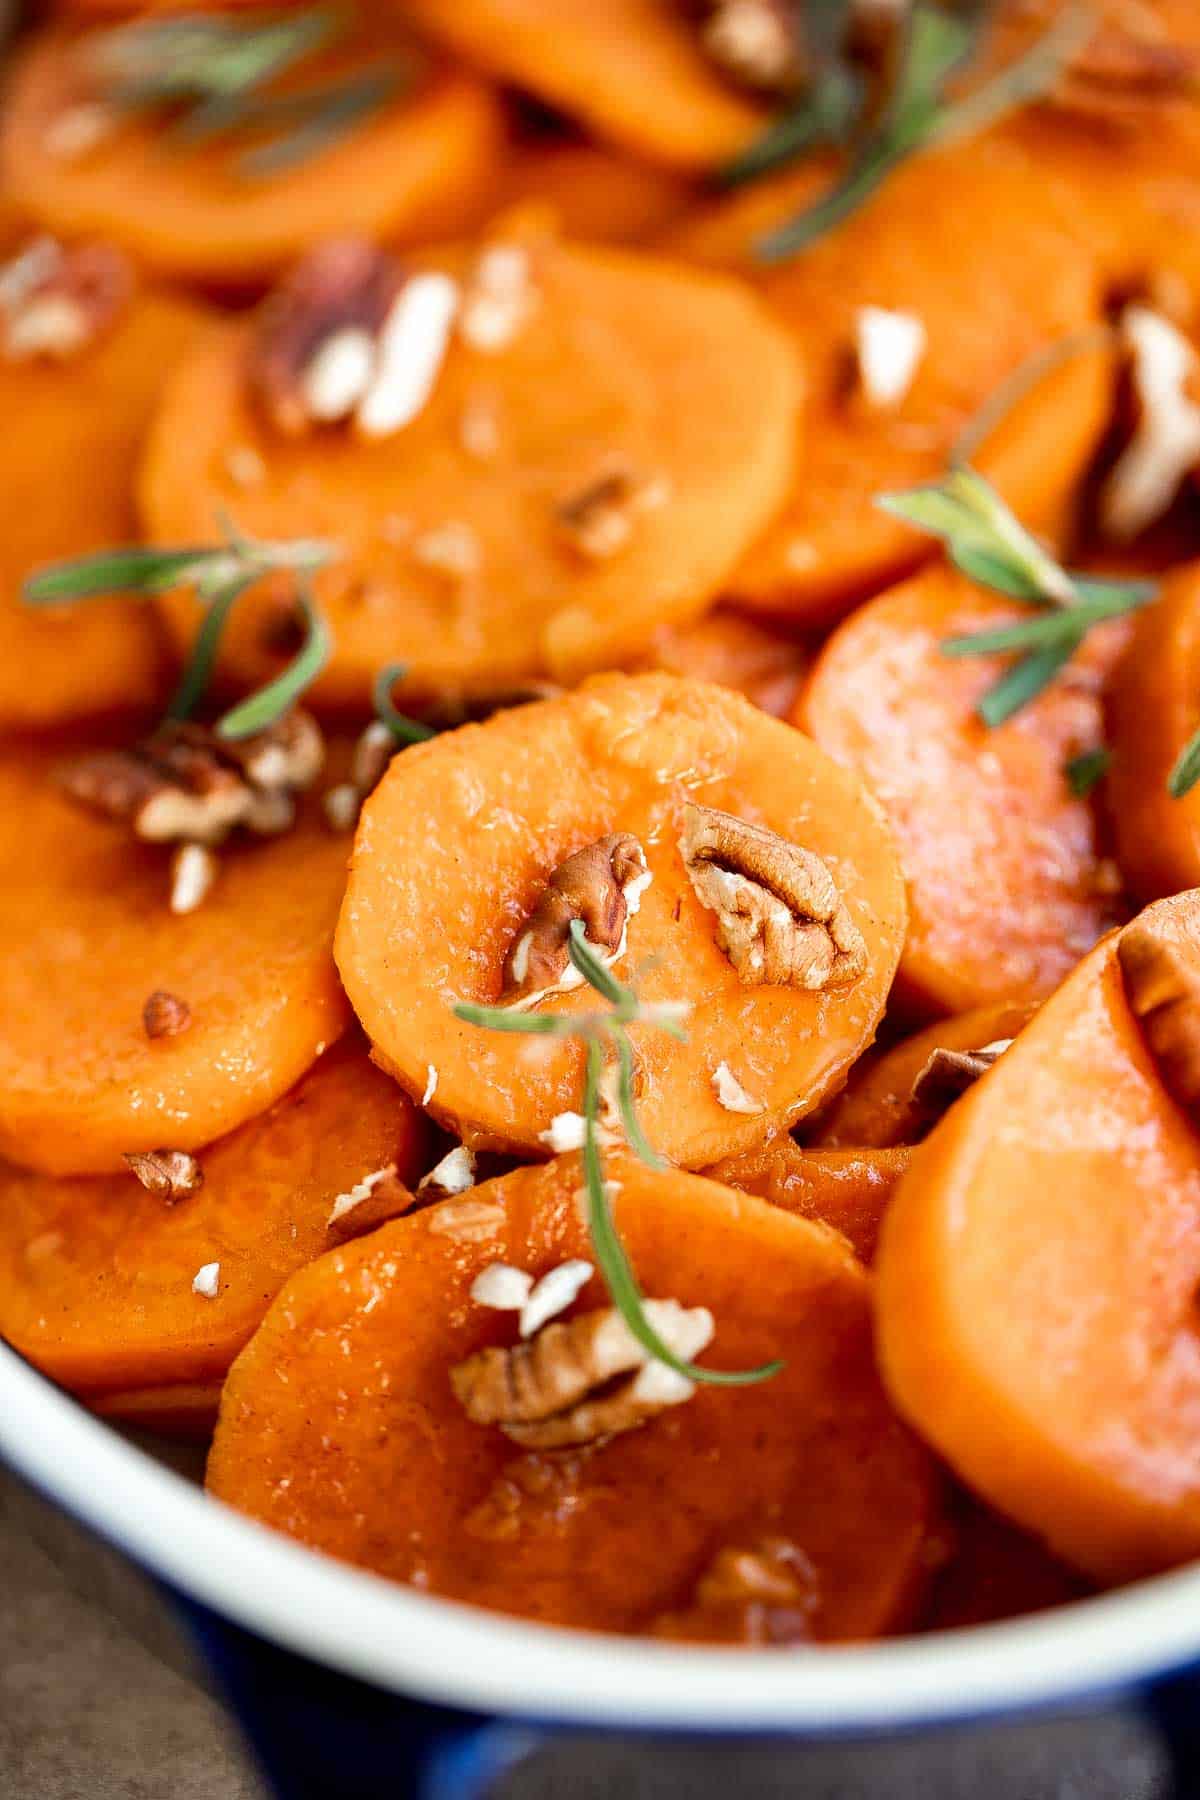 Candied Yams are tender, buttery, tangy, and sweet with a delicious brown sugar glaze. This simple Thanksgiving side dish is quick and easy to prepare. | aheadofthyme.com